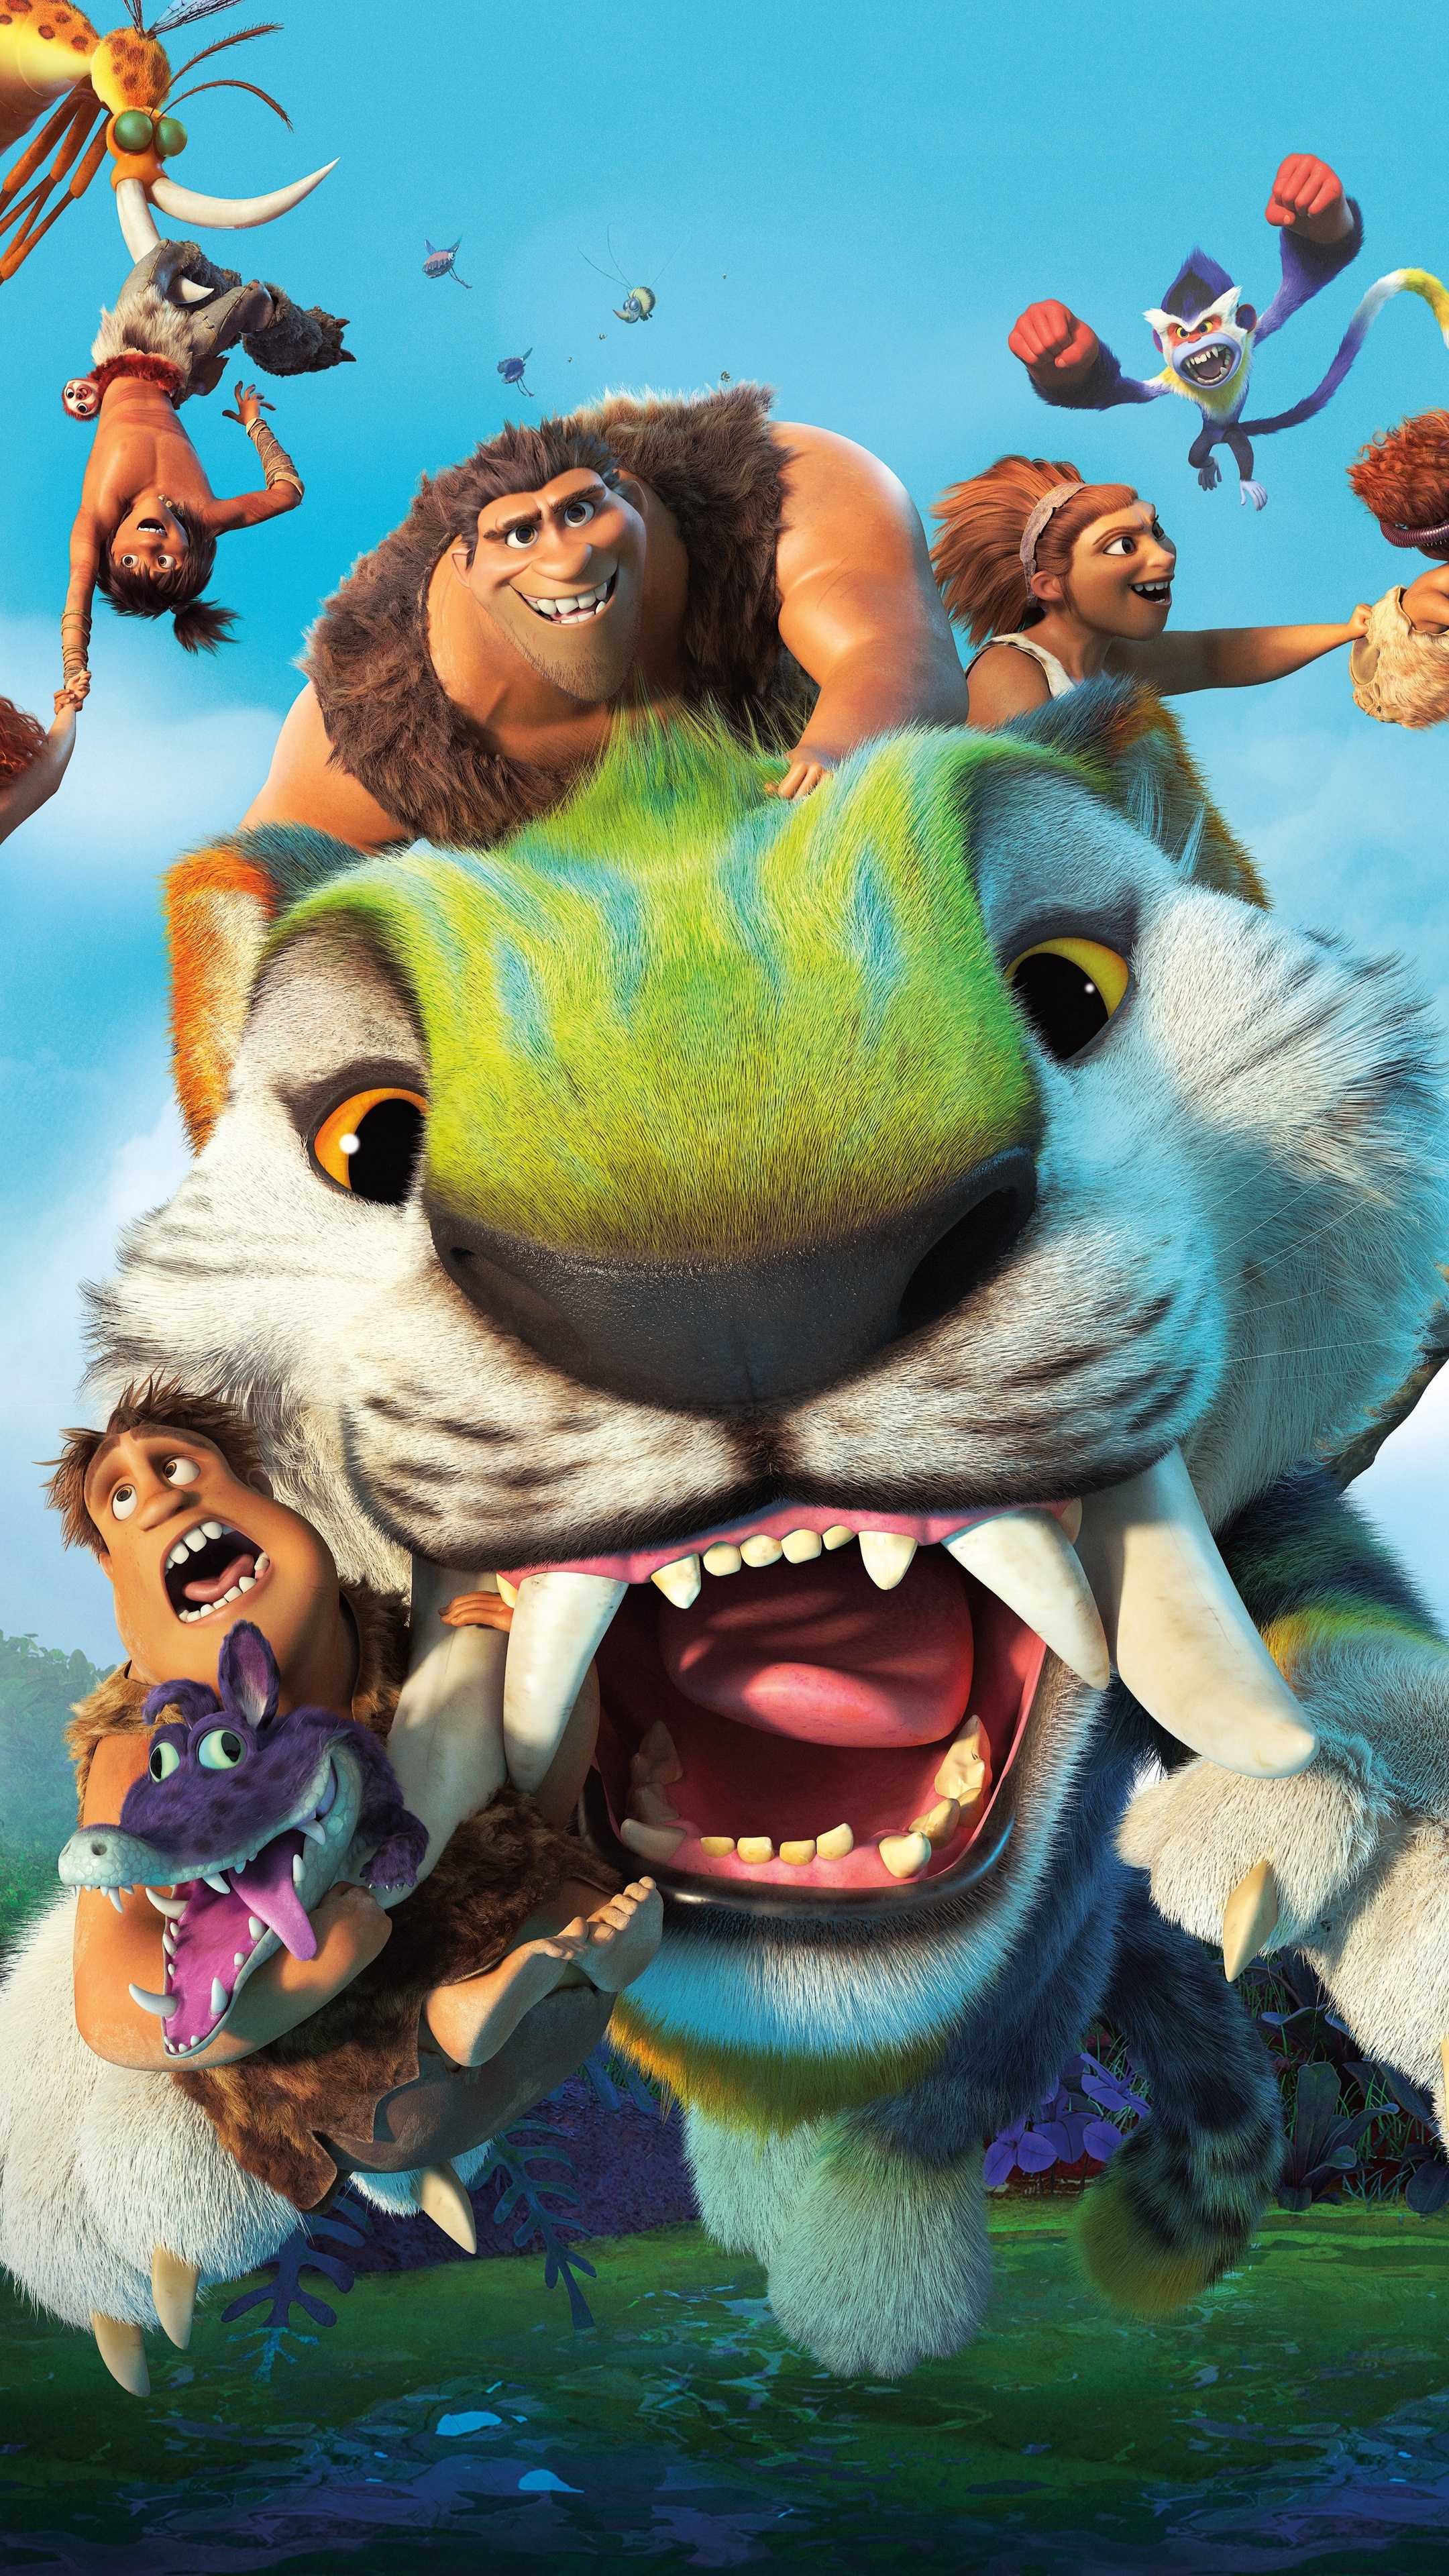 The Croods: A New Age wallpapers, Sony Xperia wallpapers, Stunning 4K images, High-resolution backgrounds, 2160x3840 4K Phone